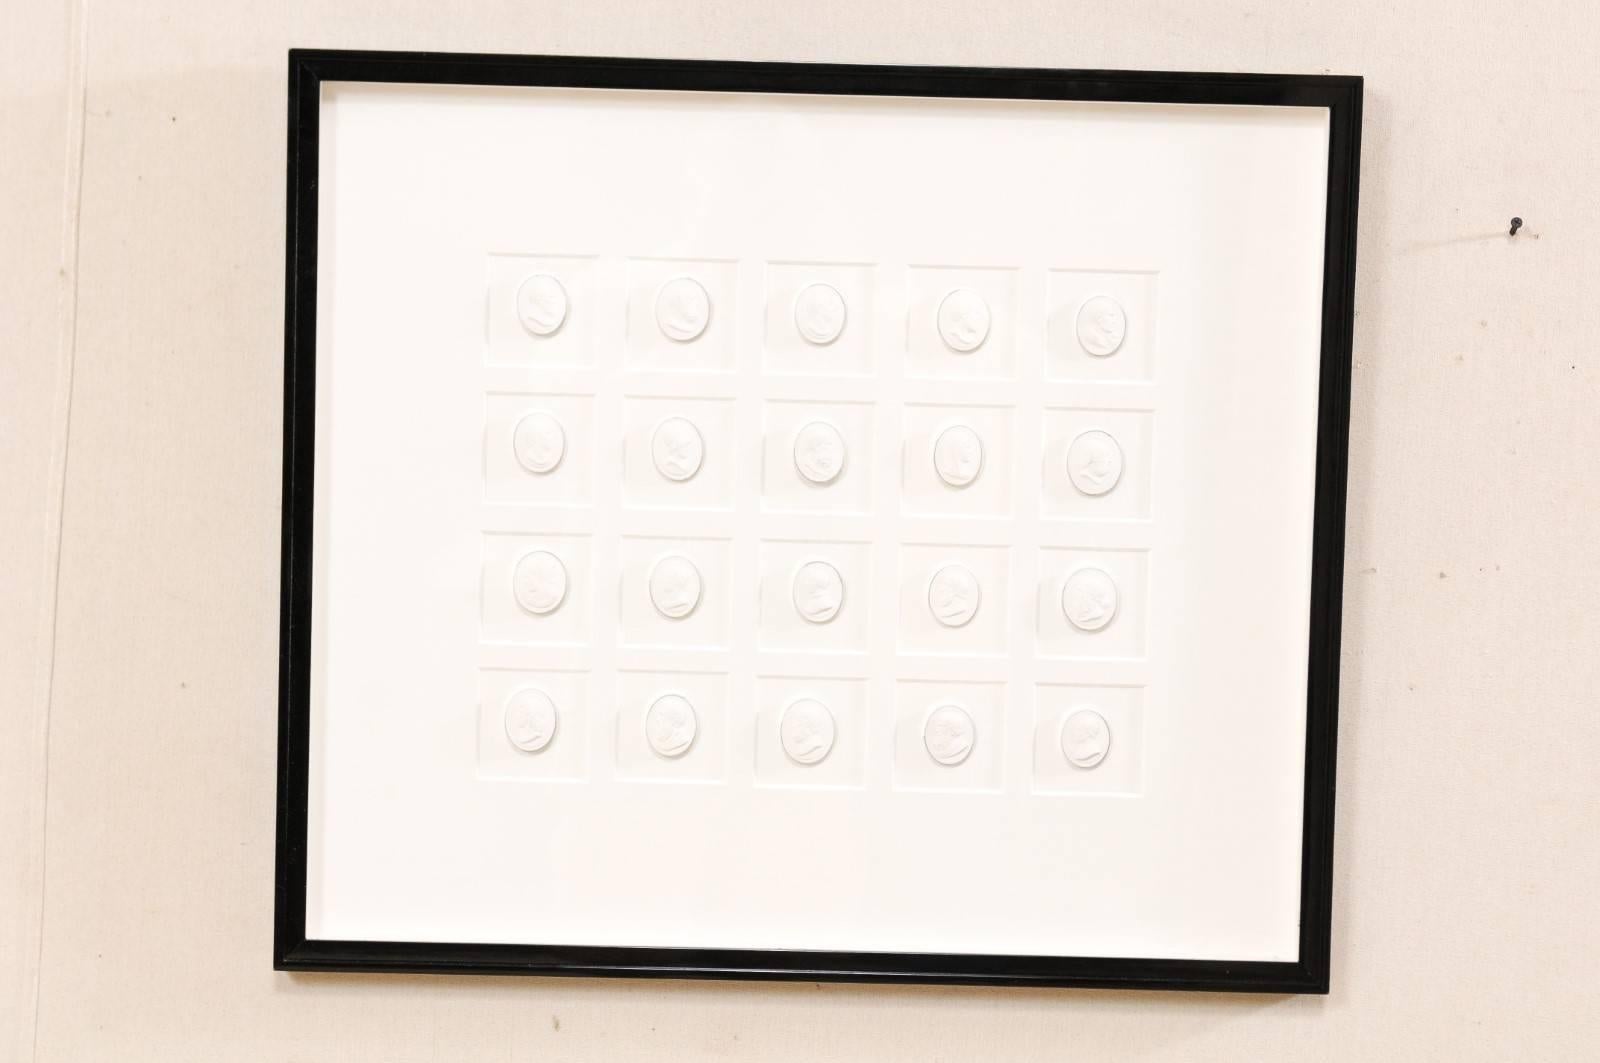 A collection of white intaglios presented within a custom black lacquer frame. This is a collection of reproduction classical profiled figure intaglios, all in a harmoniously similar size, which have been mounted and set within a custom black